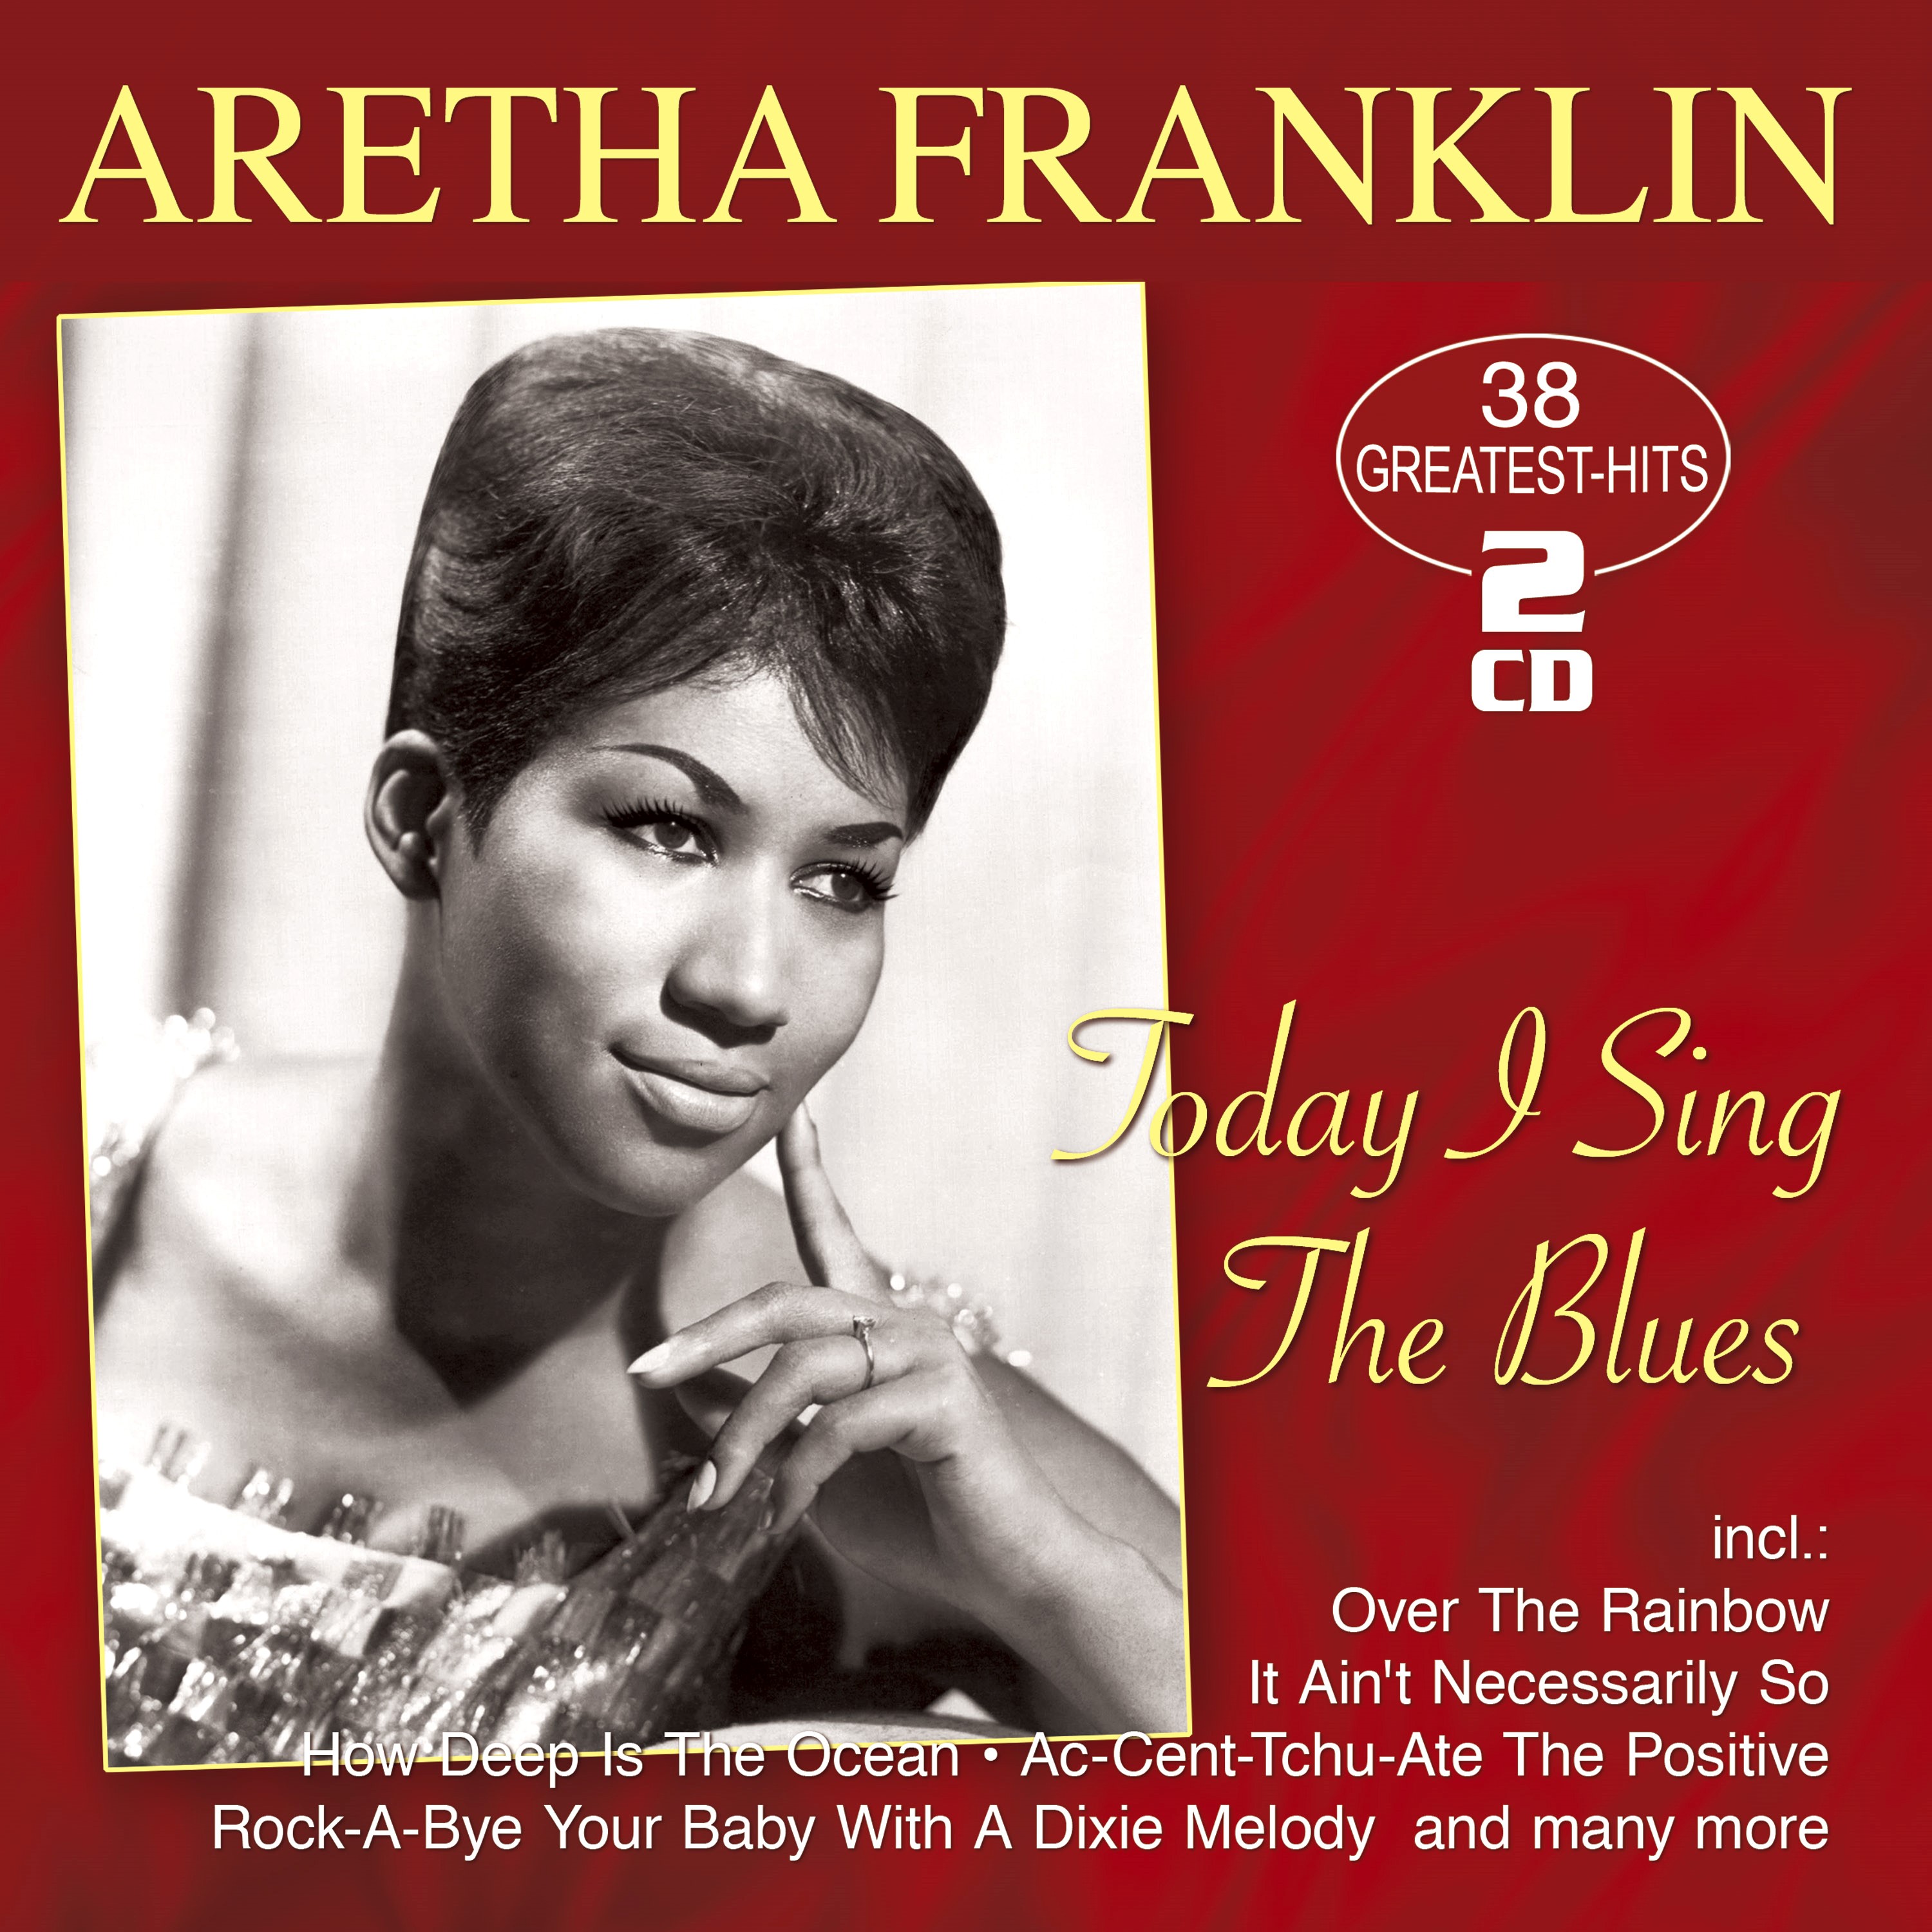 Franklin, Aretha - Today I Sing The Blues - 38 Greatest Hits